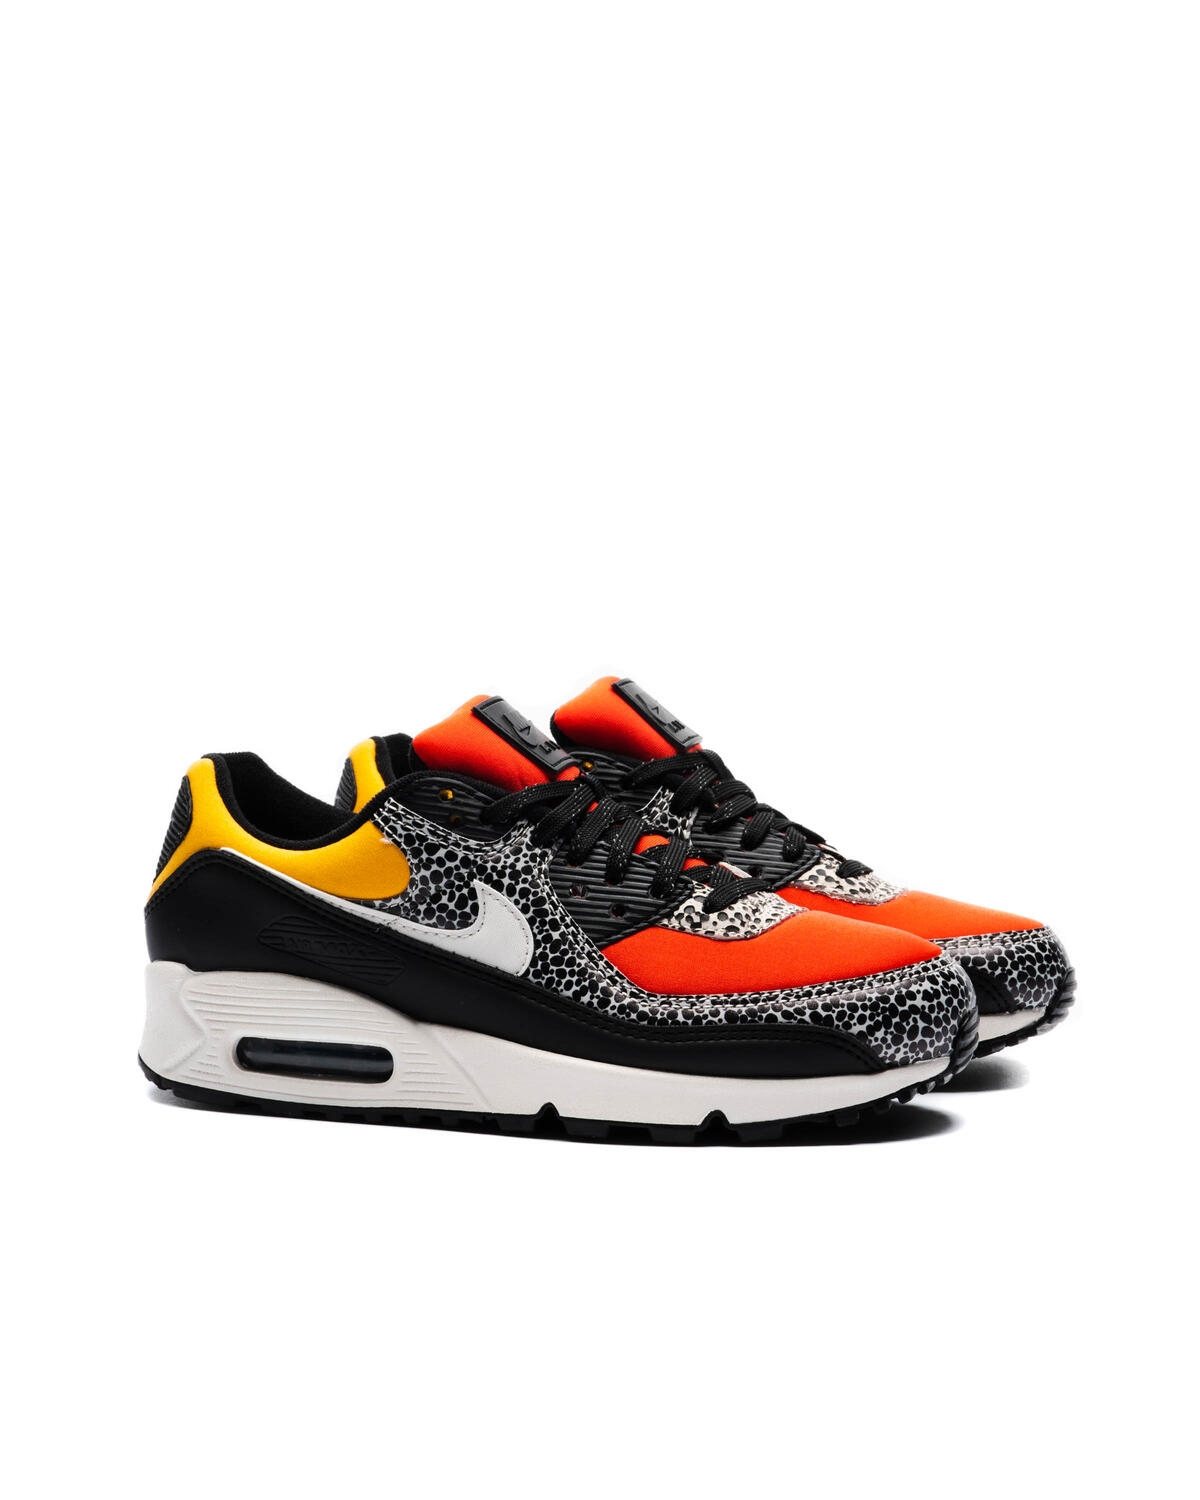 Embankment Infidelity Conflict 001 | Nike WMNS AIR MAX 90 SE "SAFARI" - IetpShops STORE | DC9446 | black  and yellow nike hyperfuse shoes price guide